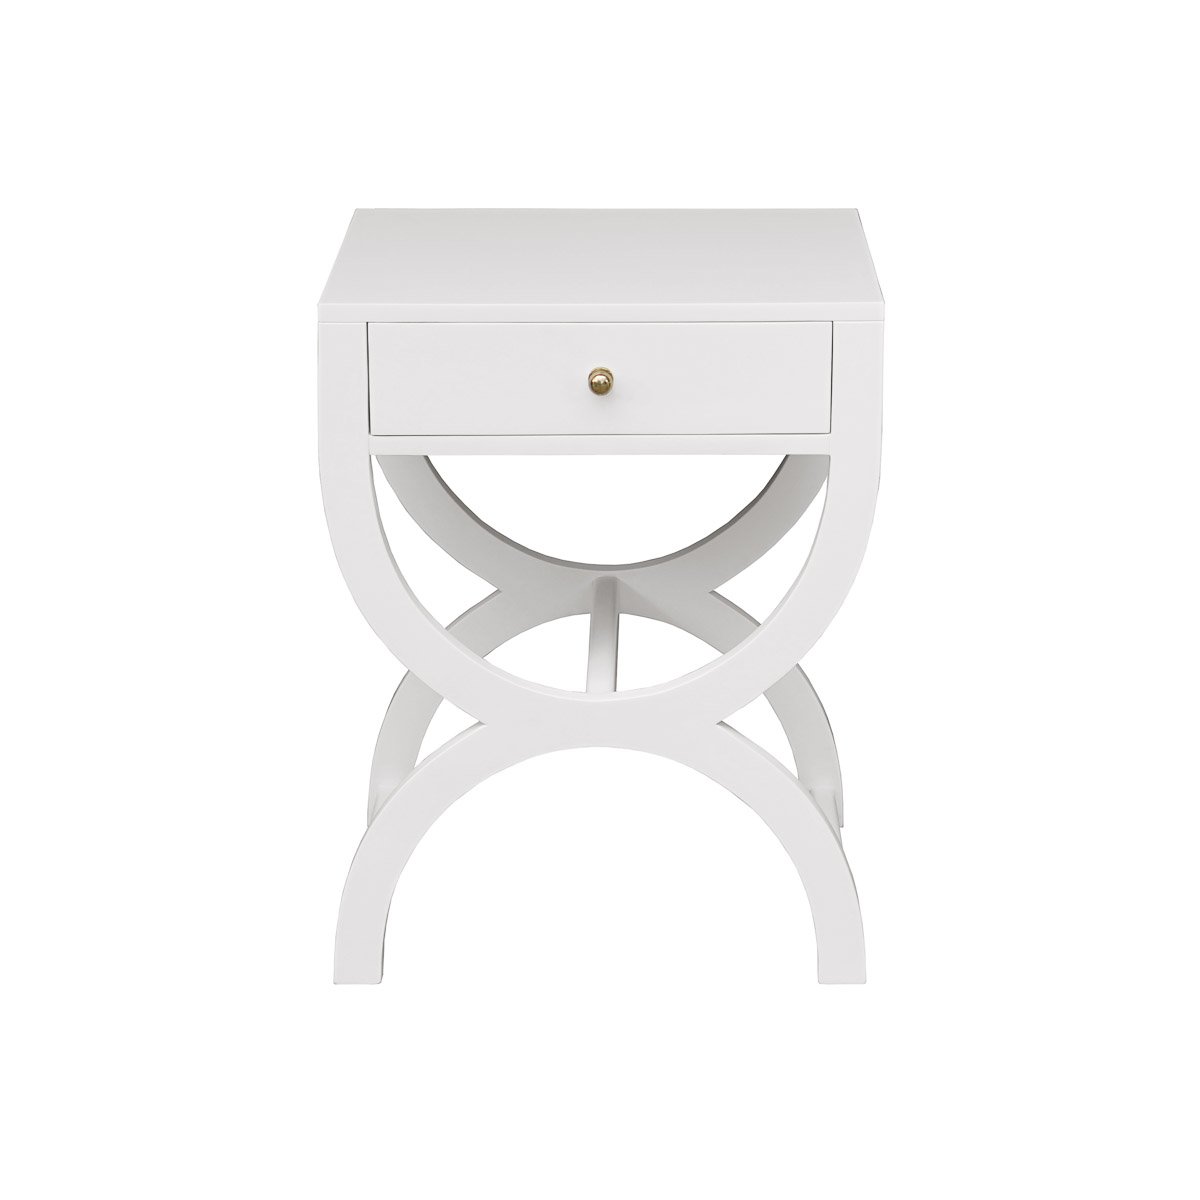 Paige Side Table Matte White Lacquer. Front view.